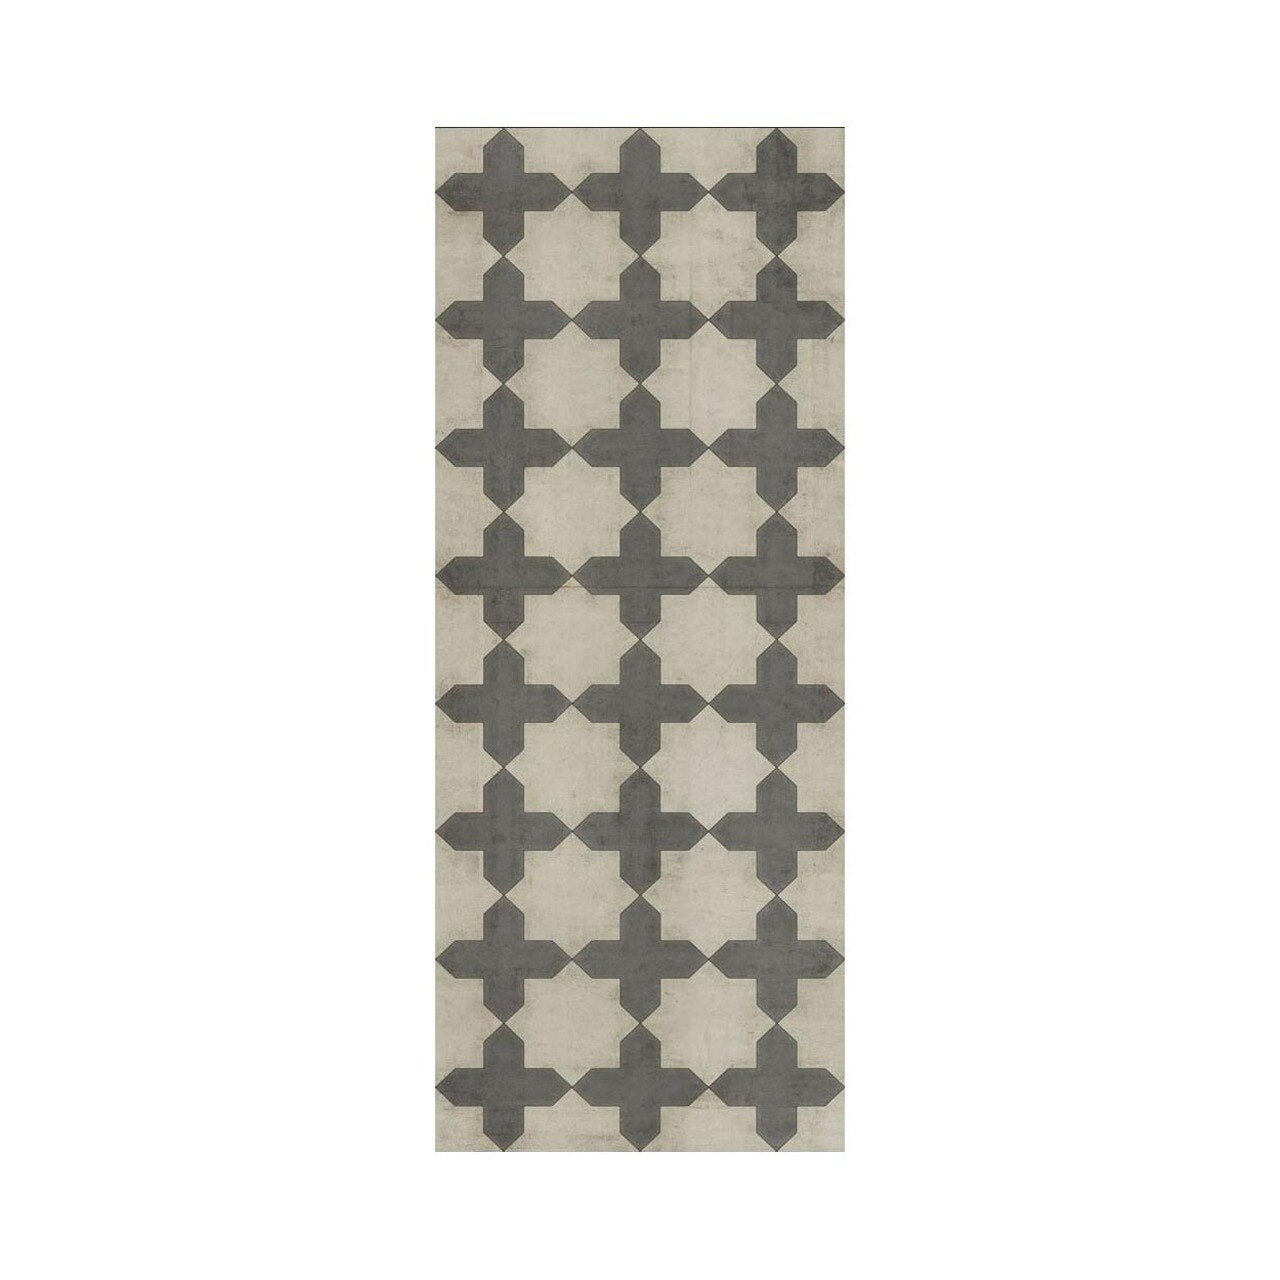 A grey and white Simple as Doves Vinyl Rug - Pattern 23 from Spicher and Company, with a geometric design, combining colors and style.